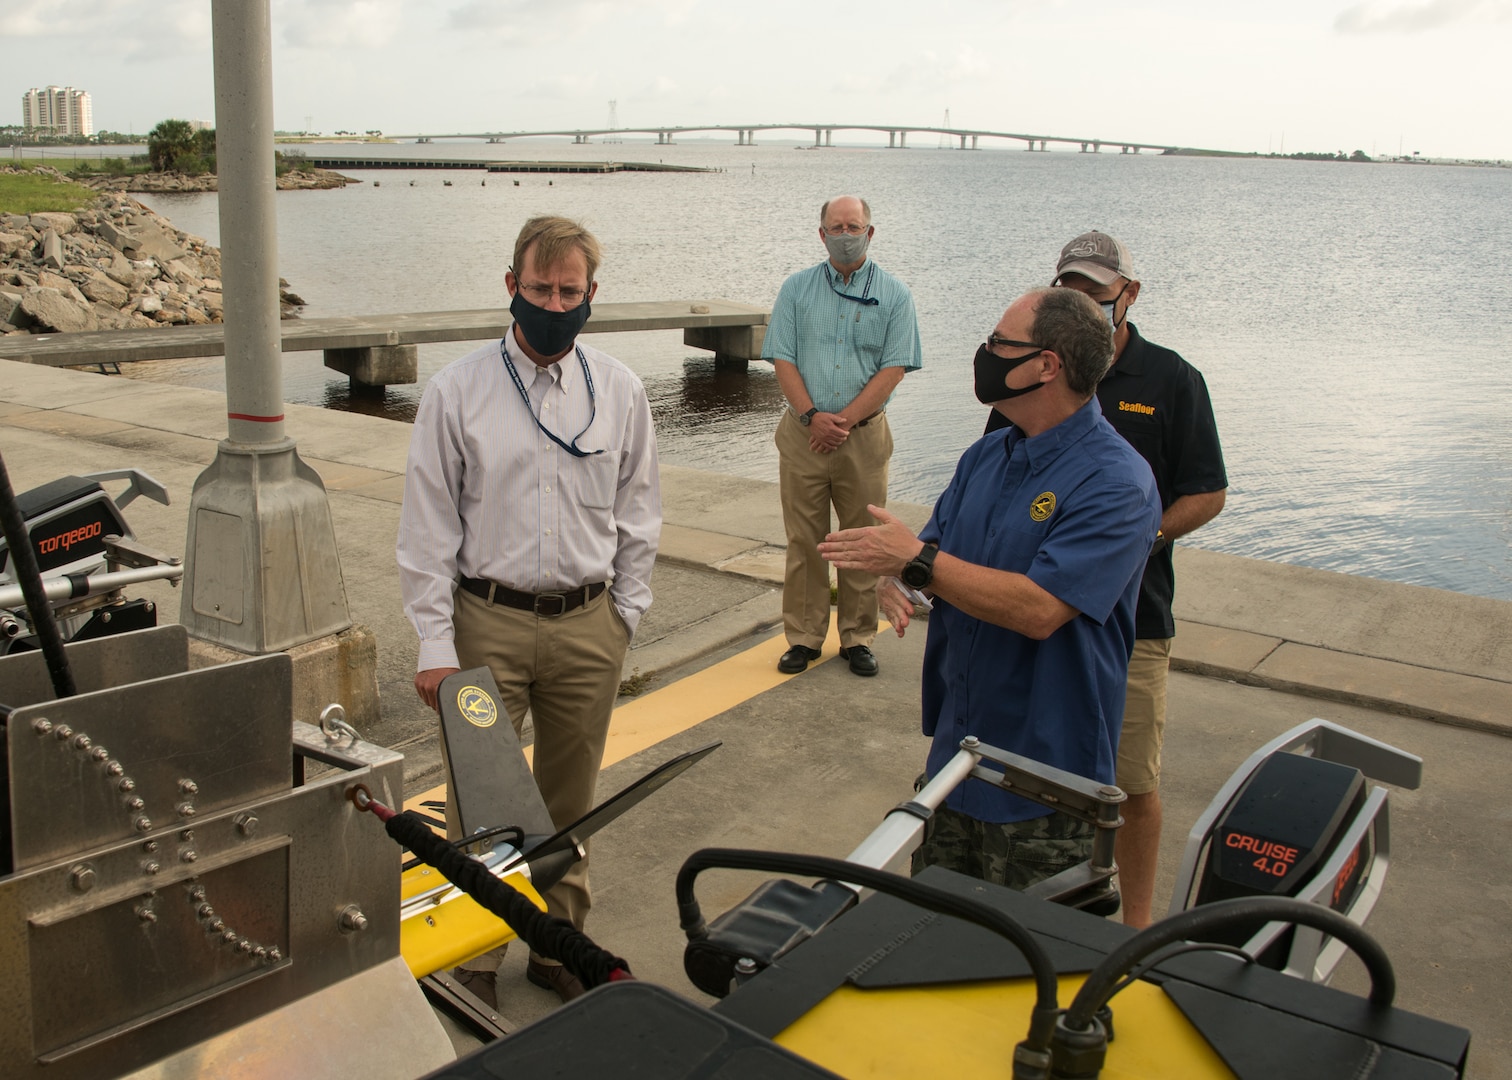 Naval Surface Warfare Center Panama City Division (NSWC PCD) recently collaborated with Commander, Naval Meteorology and Oceanography Command in coordination with the Naval Oceanographic Office’s Fleet Survey Team, and Klein Marine to conduct a live Advanced Naval Technology Exercise (ANTX) event at NSWC PCD. Richard Dentzman, right, from Klein Marine Systems describes the ANTX demonstration to Dr. Peter Adair, left, NSWC PCD technical director, as Dr. Todd Holland, NSWC PCD director, mine warfare prototyping, and John Tamplin from Seafloor Systems observe.